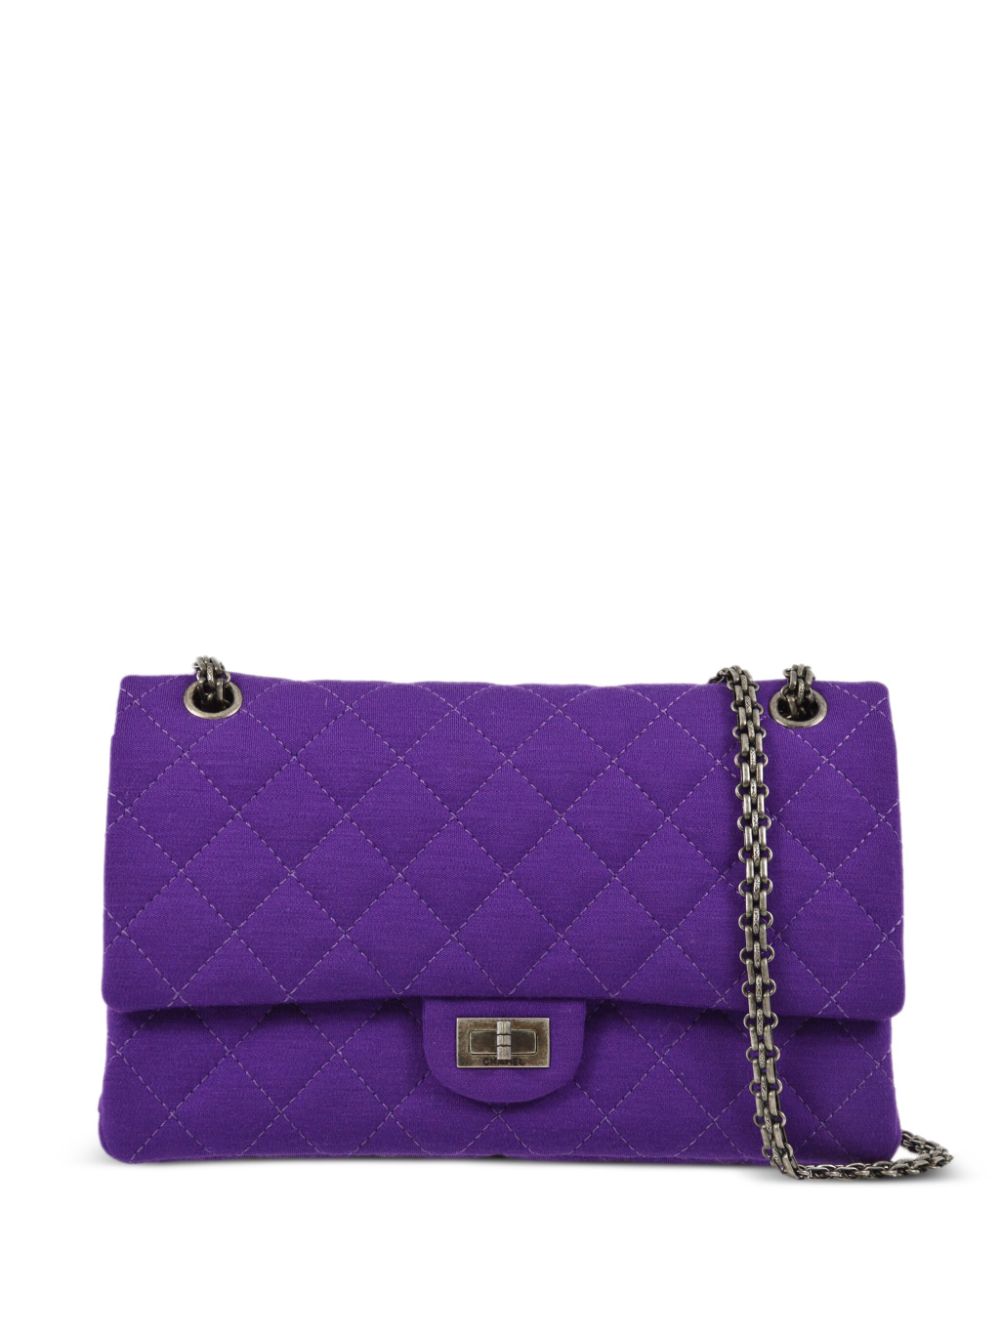 CHANEL Pre-Owned 2008 2.55 Double Flap shoulder bag - Purple von CHANEL Pre-Owned